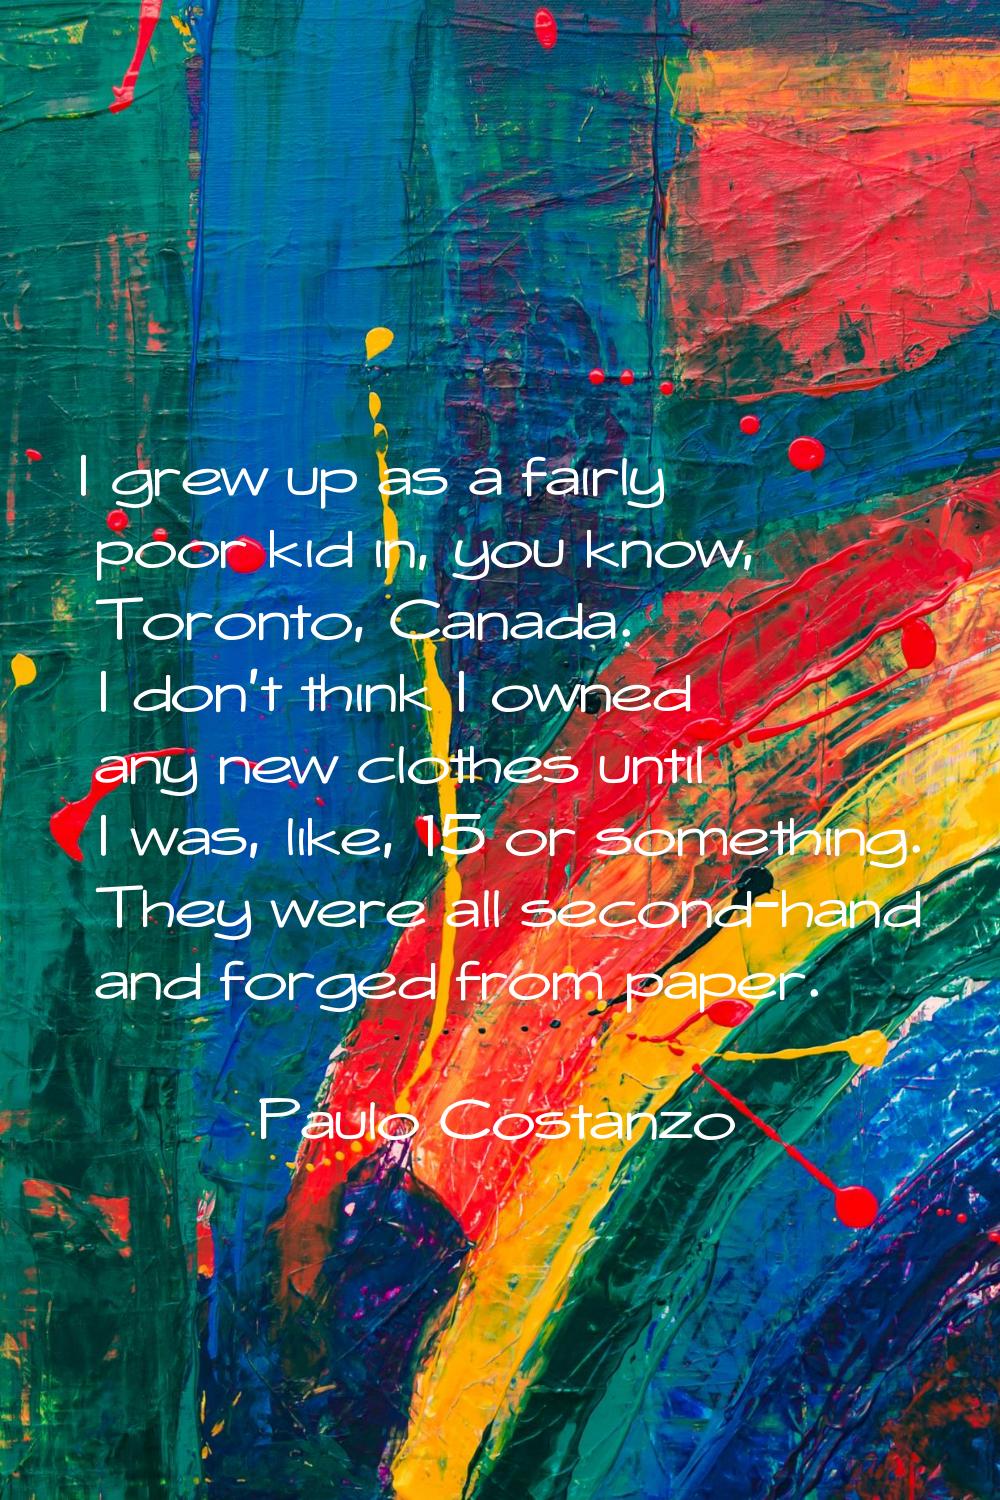 I grew up as a fairly poor kid in, you know, Toronto, Canada. I don't think I owned any new clothes